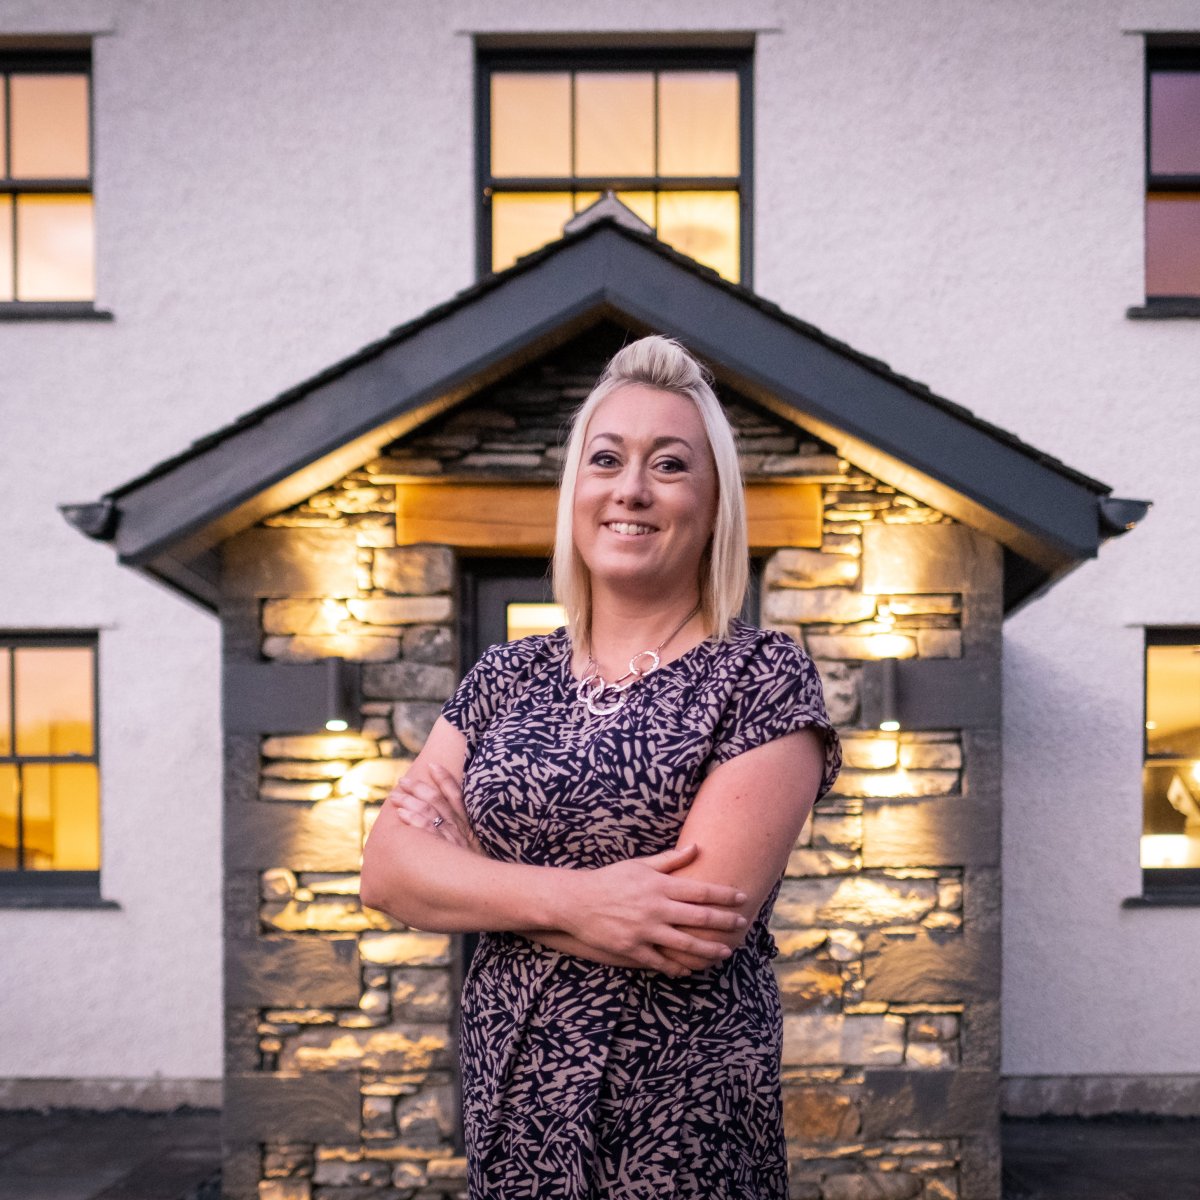 Cumbrian local Gemma Dawe hired by property organisation in new leading role